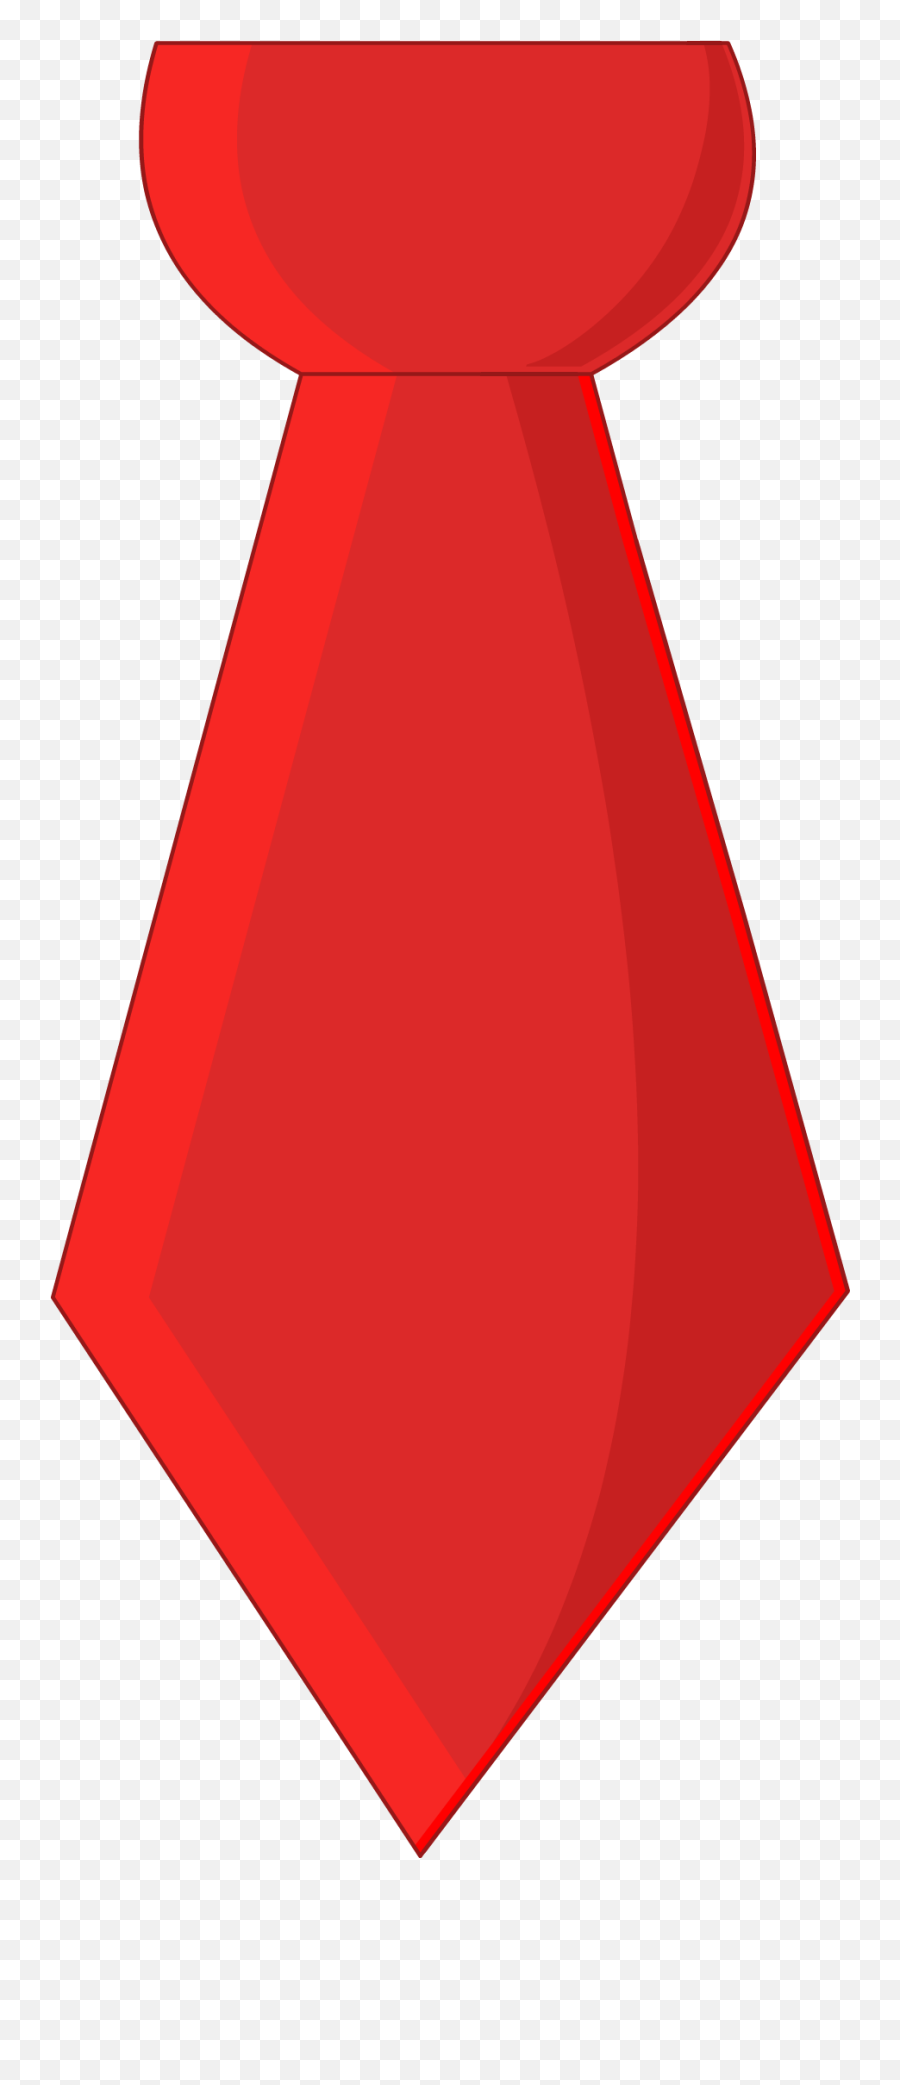 Red Tie Transparent Png Clipart Free - Clip Art,Tie Clipart Png